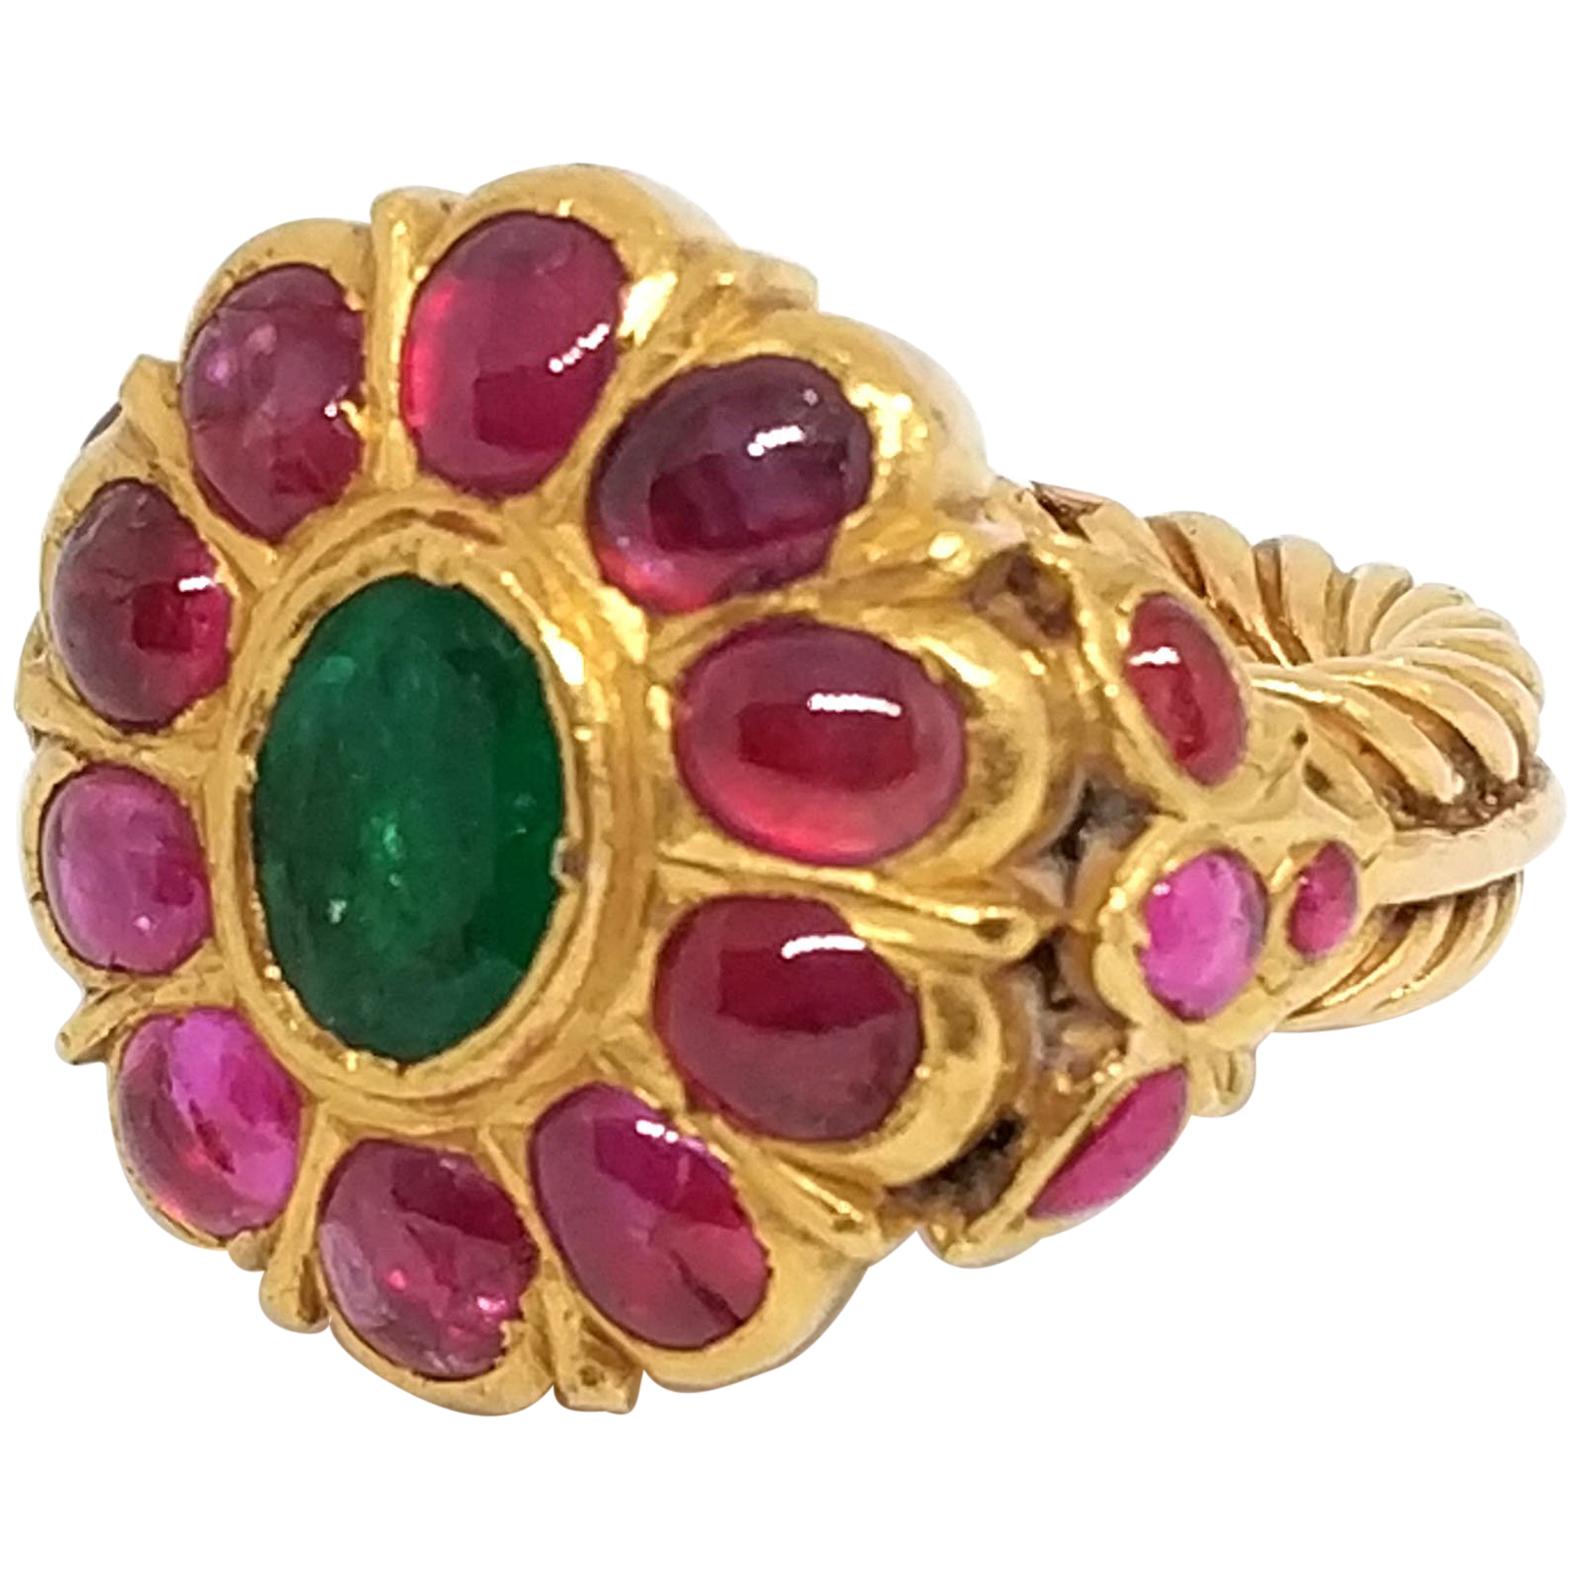 Antique Royal 5.5 carat Ruby and 3 carat Emerald Ring in 23 Carat Gold For Sale